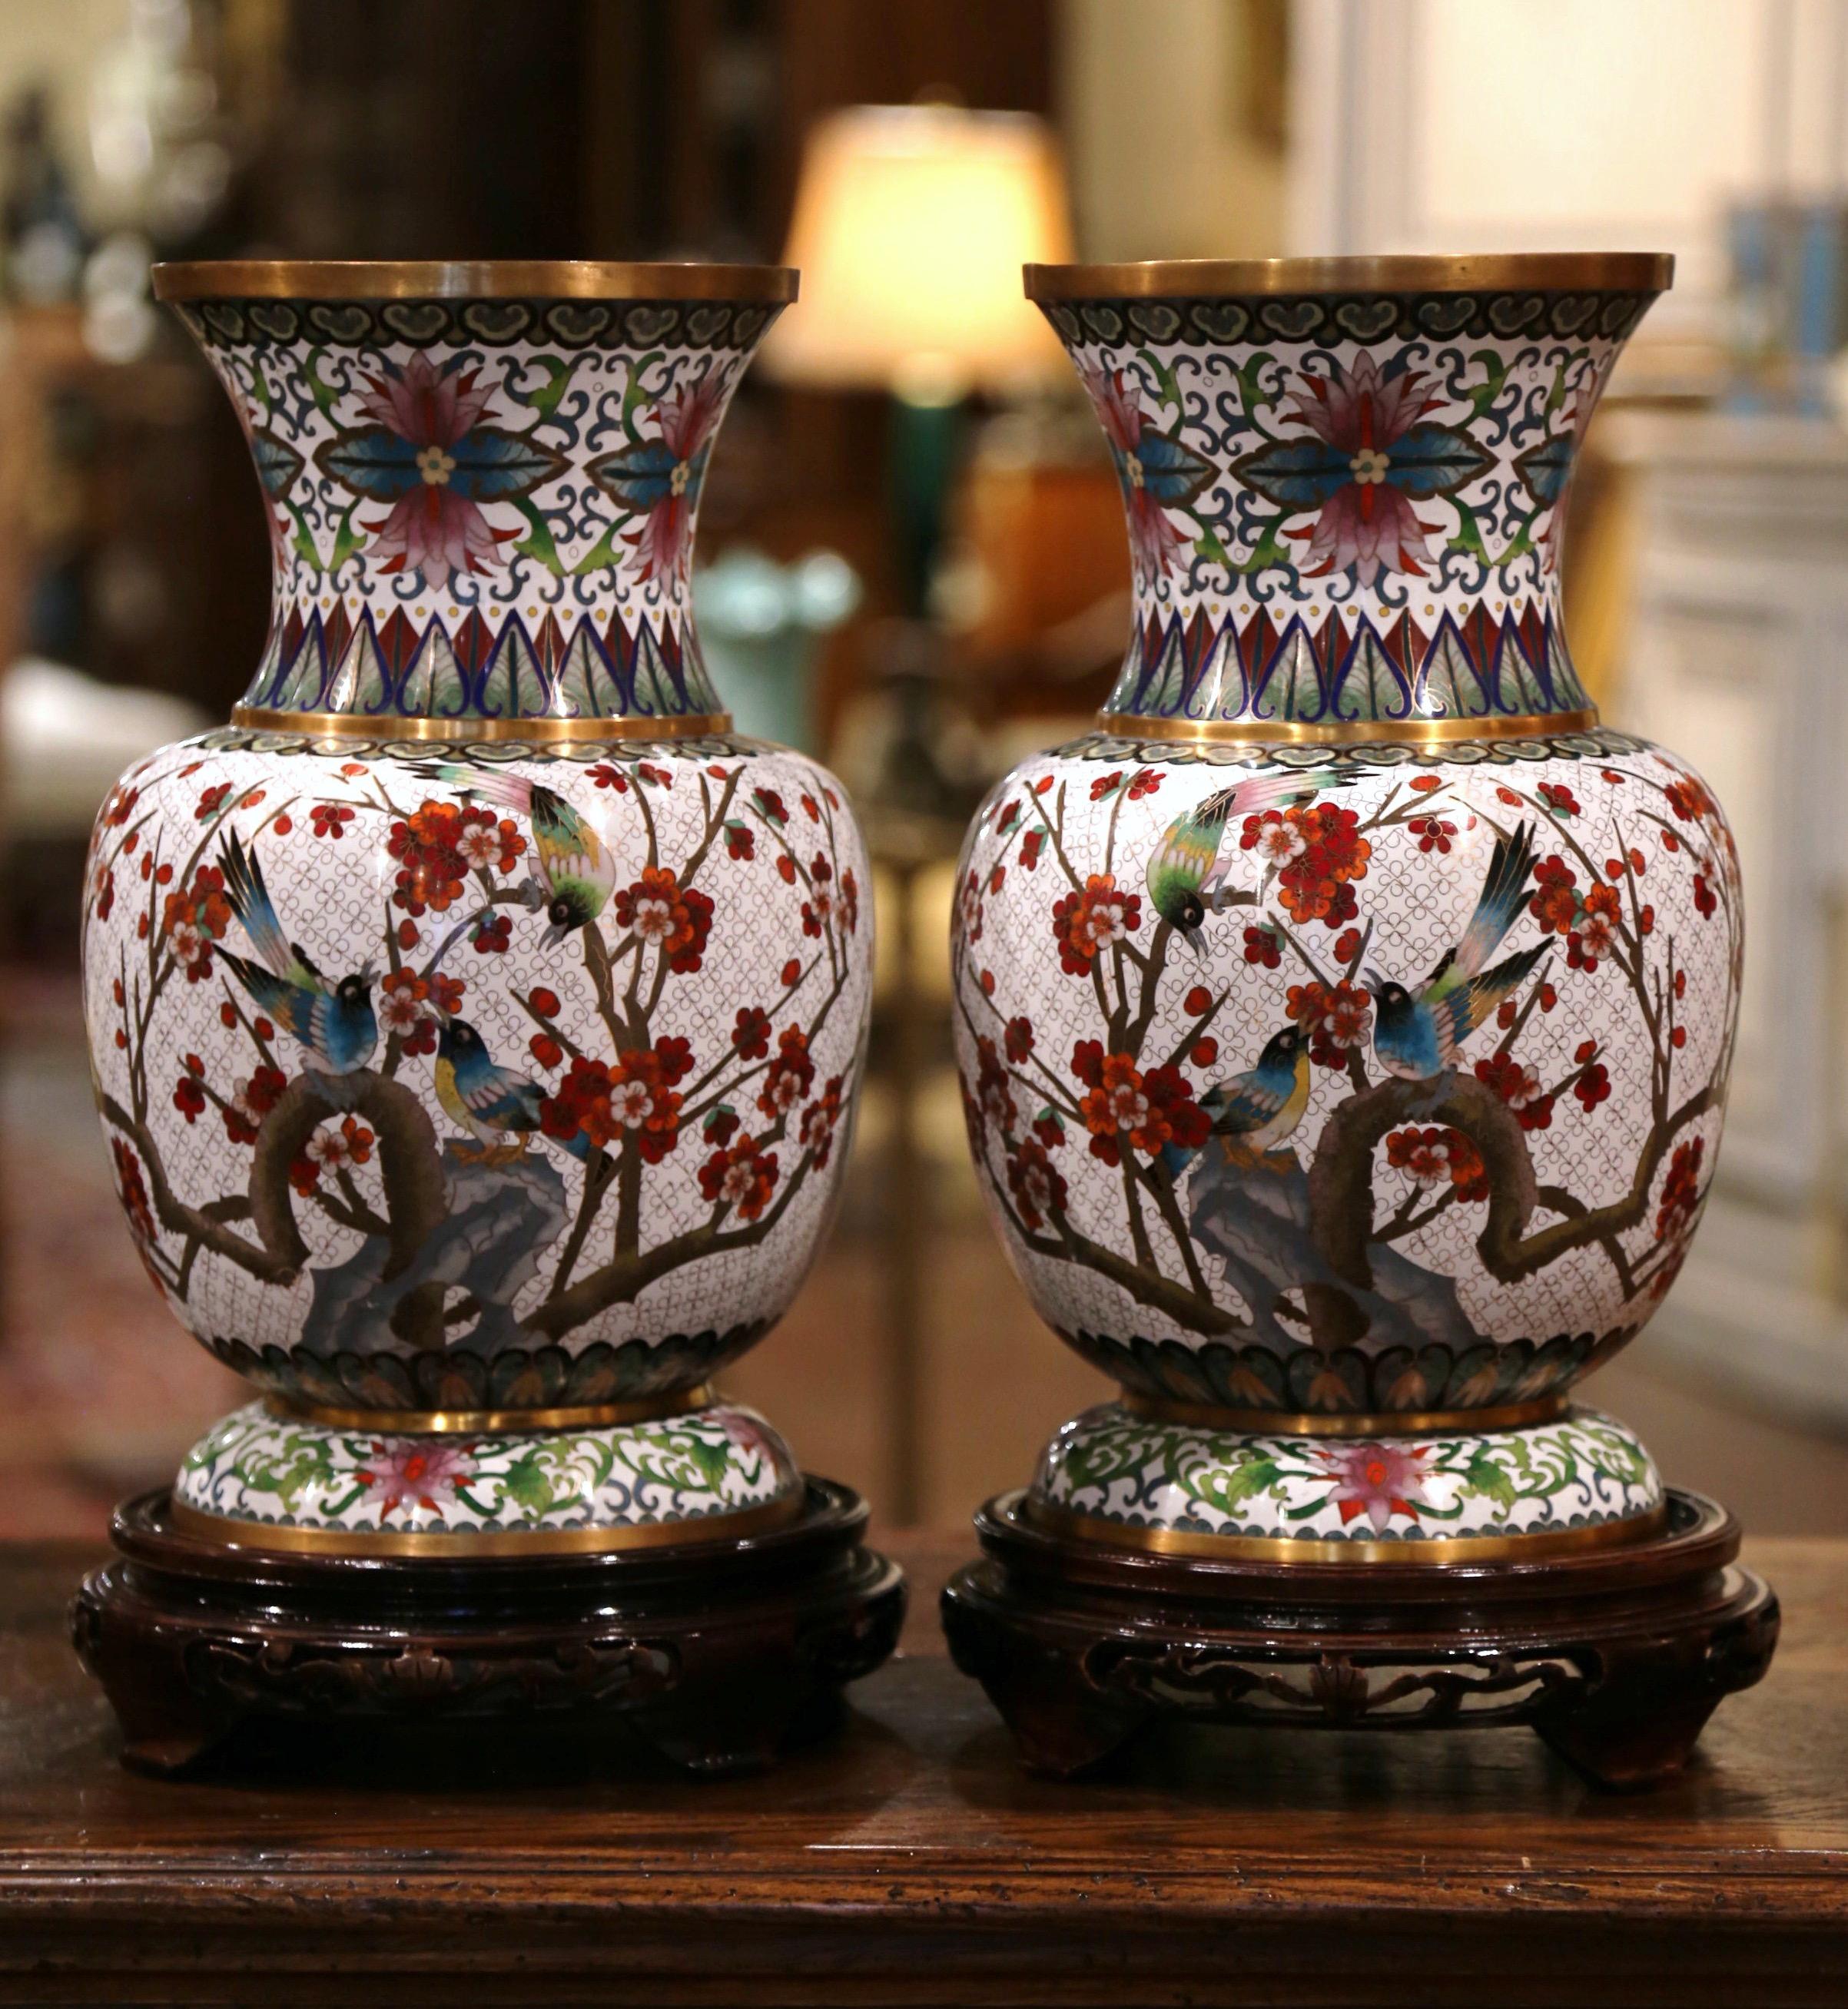 Brass Pair of 20th Century Chinese Cloisonné Enamel Vases on Stand with Bird Decor